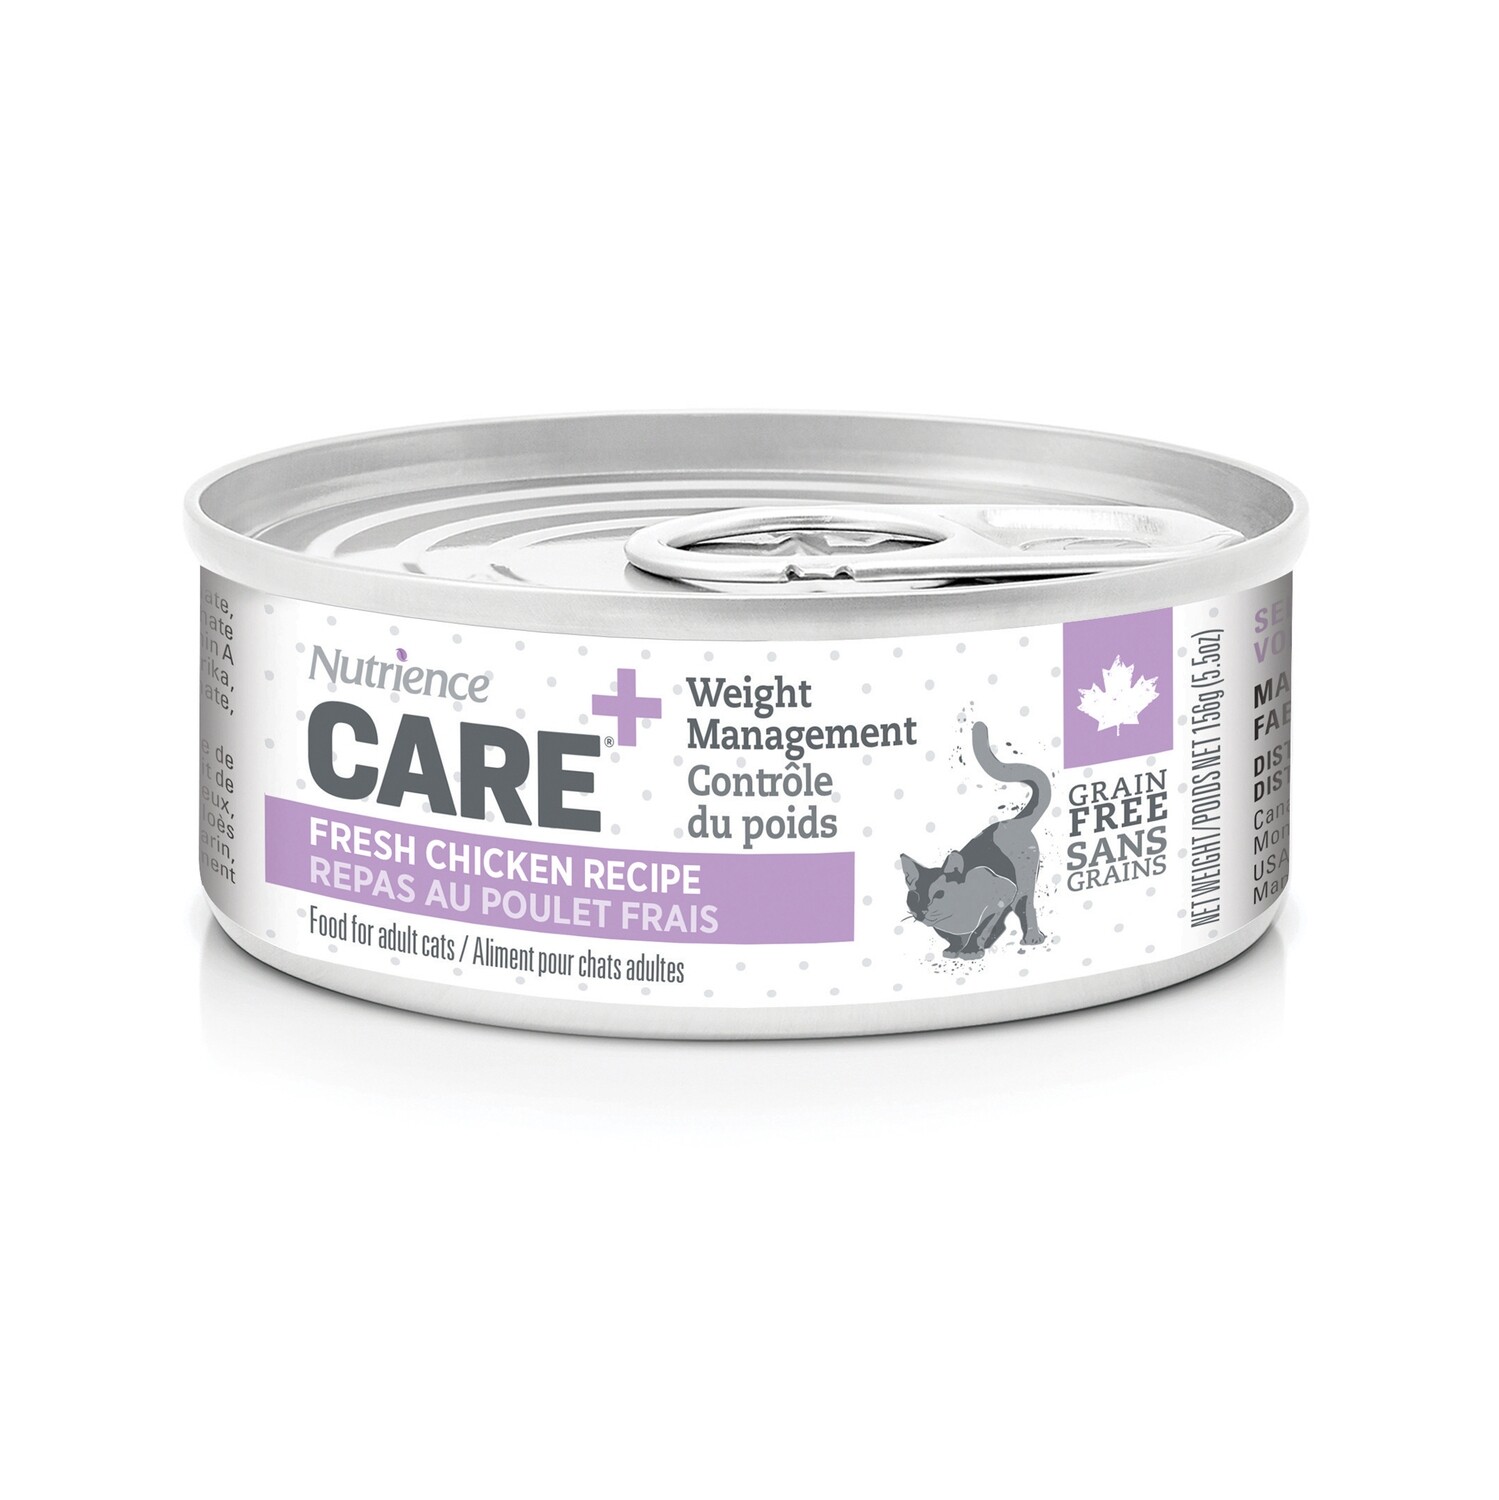 NUTRIENCE CARE WEIGHT MANAGEMENT PATE F/CATS 156G